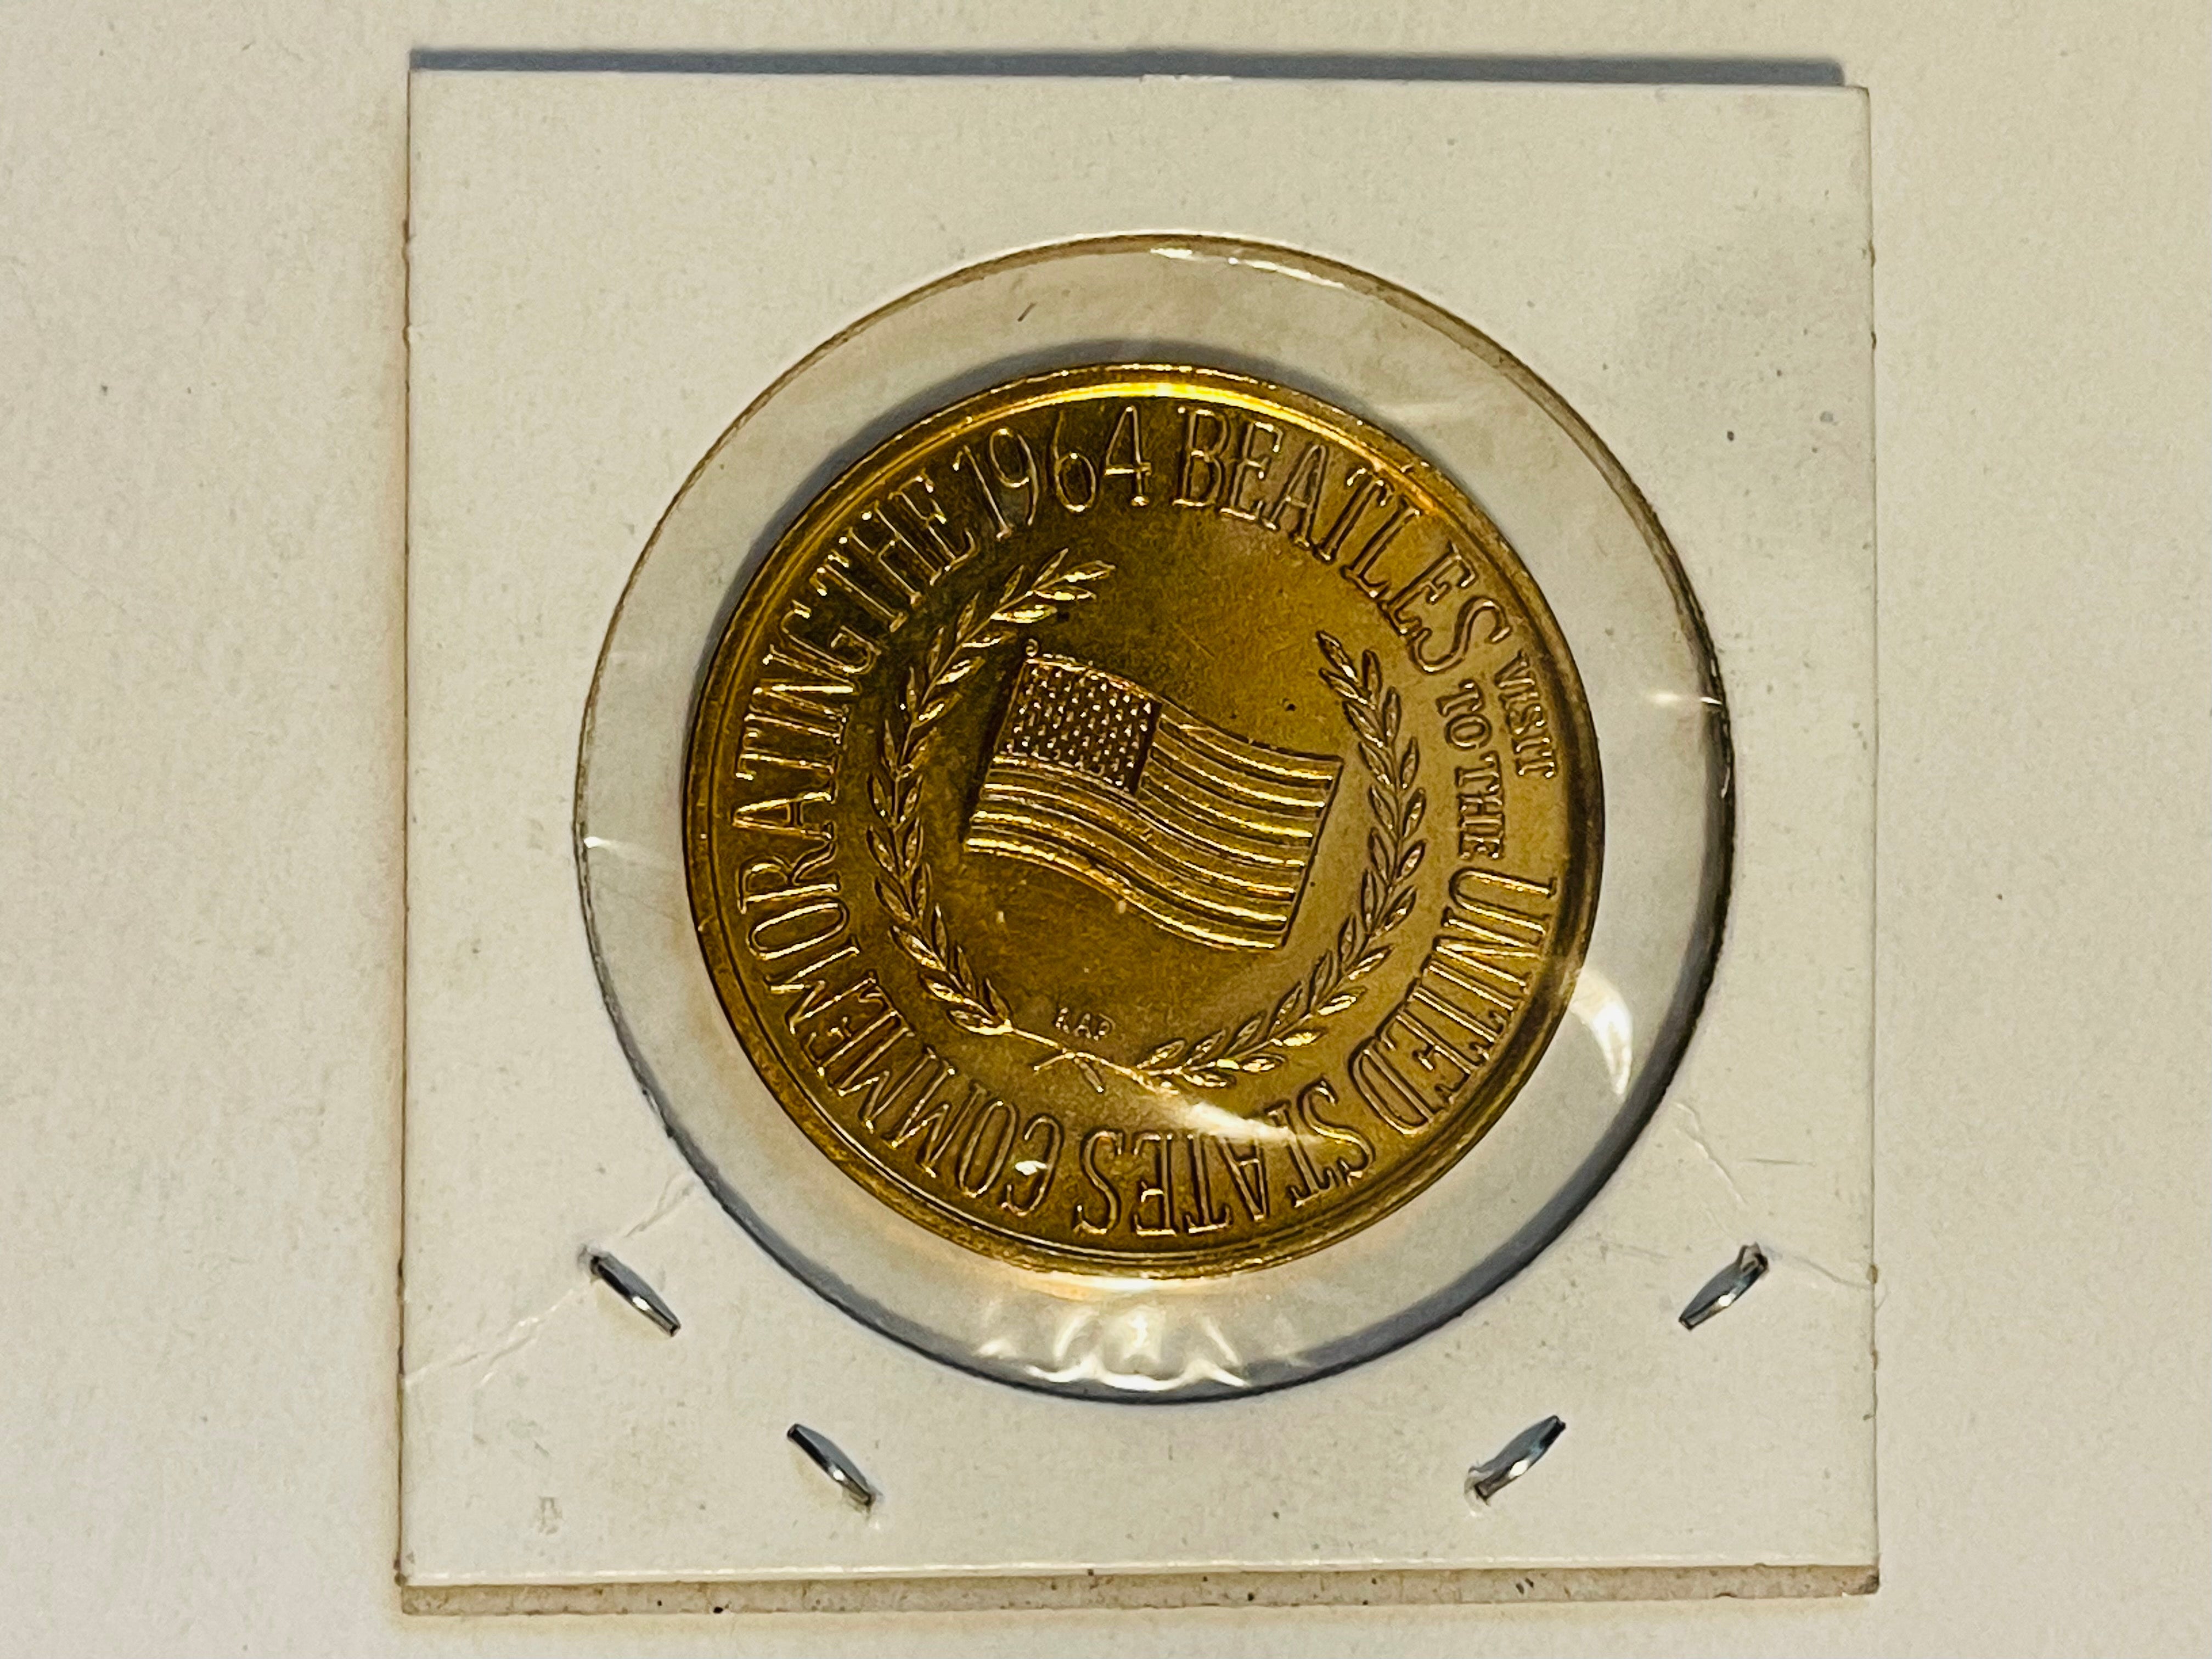 Beatles rare original commerative coin from 1964